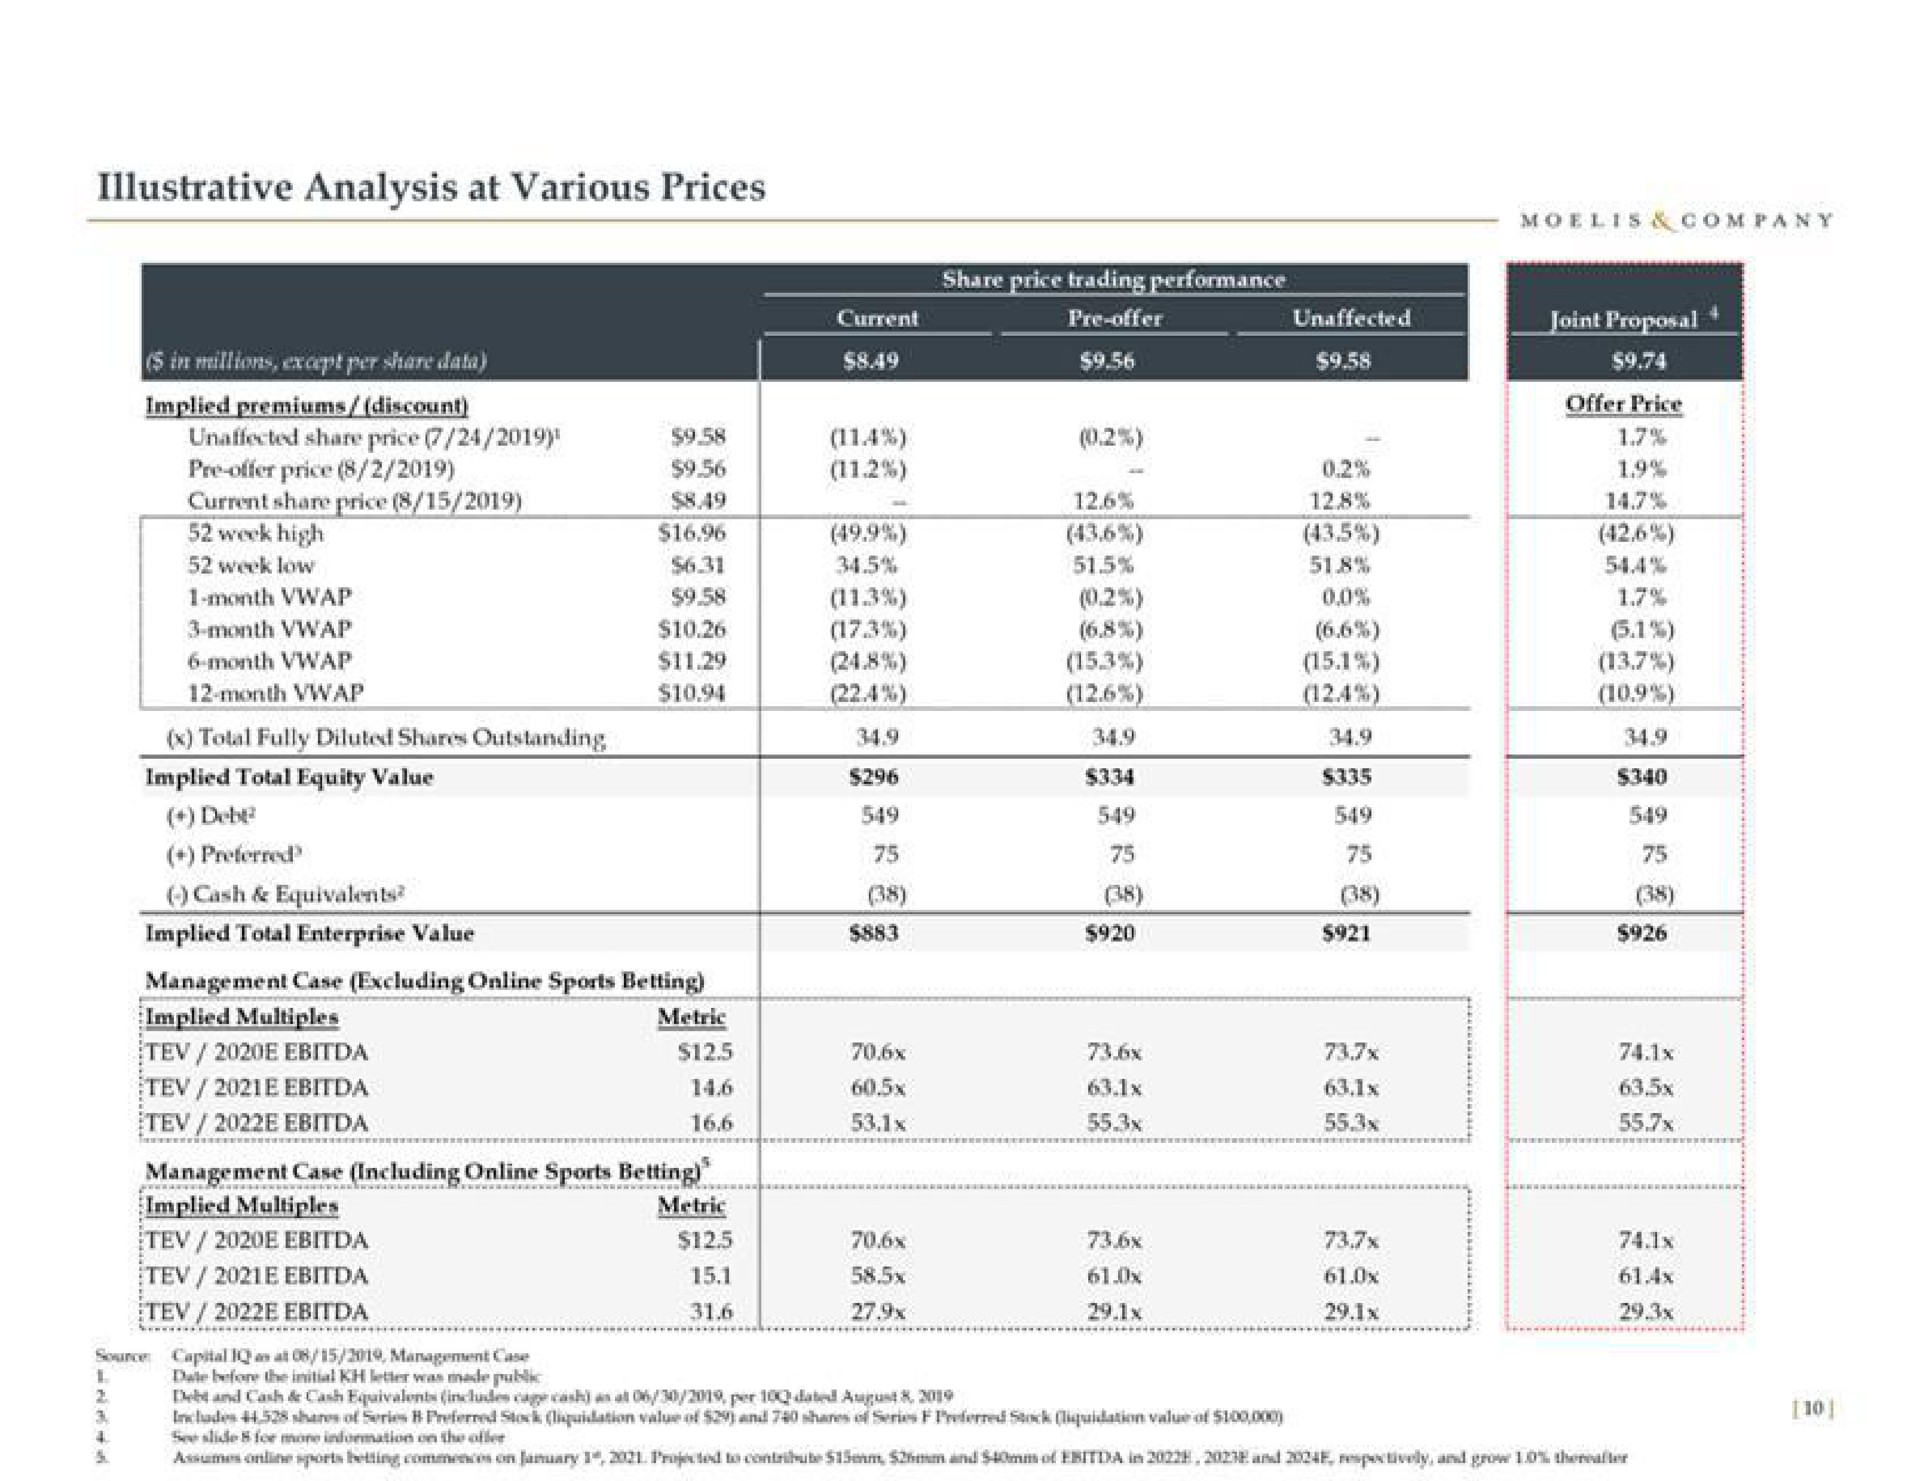 illustrative analysis at various prices seem price management case excluding sports betting serene implied multiples cape dieting men reese metric sin be | Moelis & Company